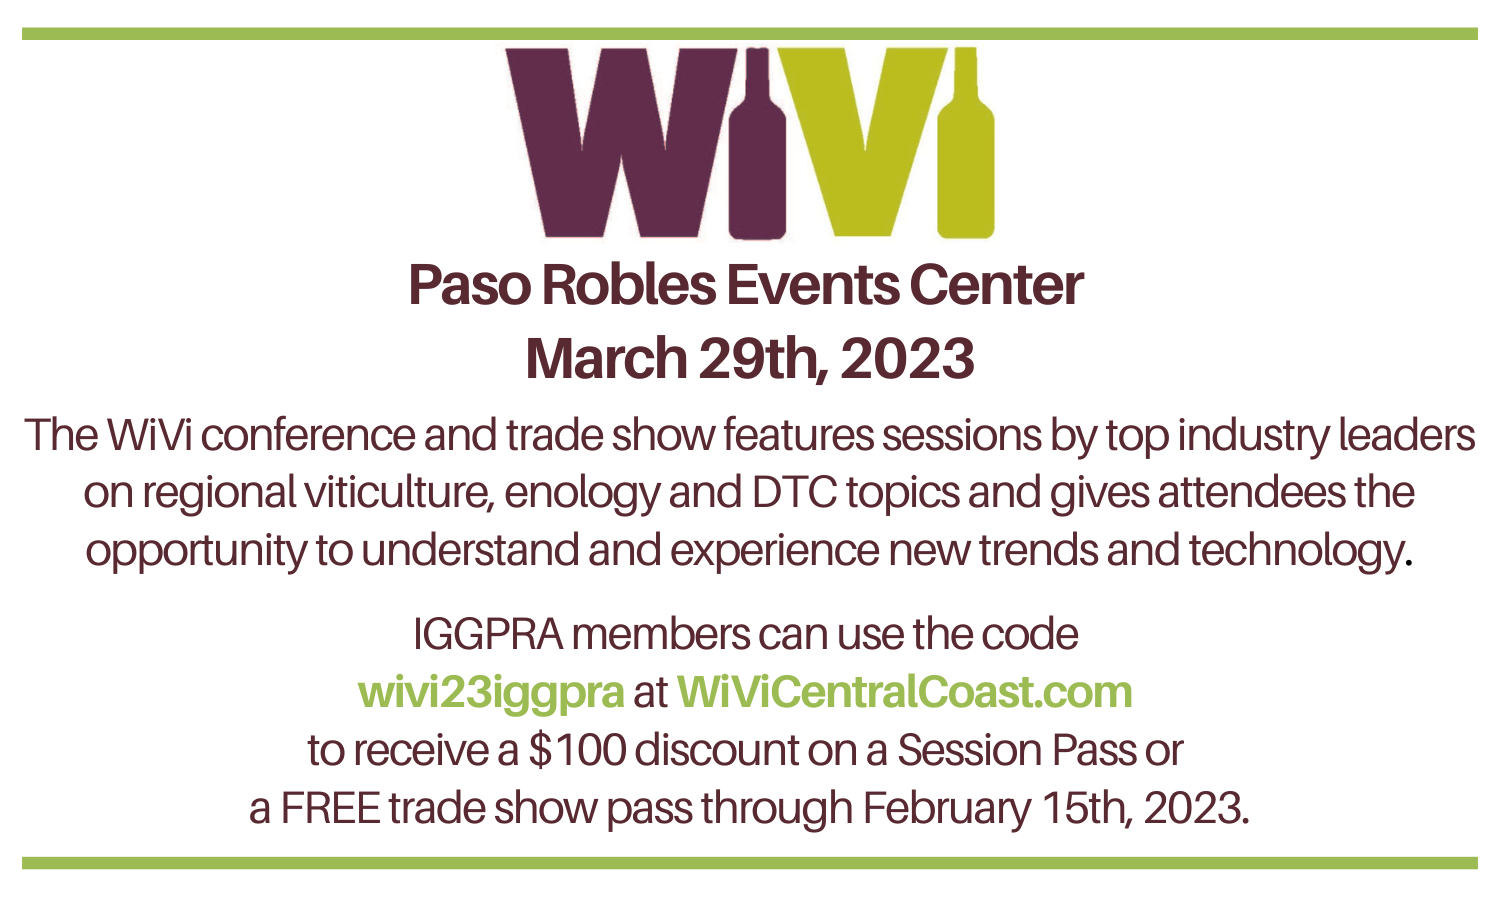 Feb 15th Last Day for WiVi Coupon Code Independent Grape Growers of